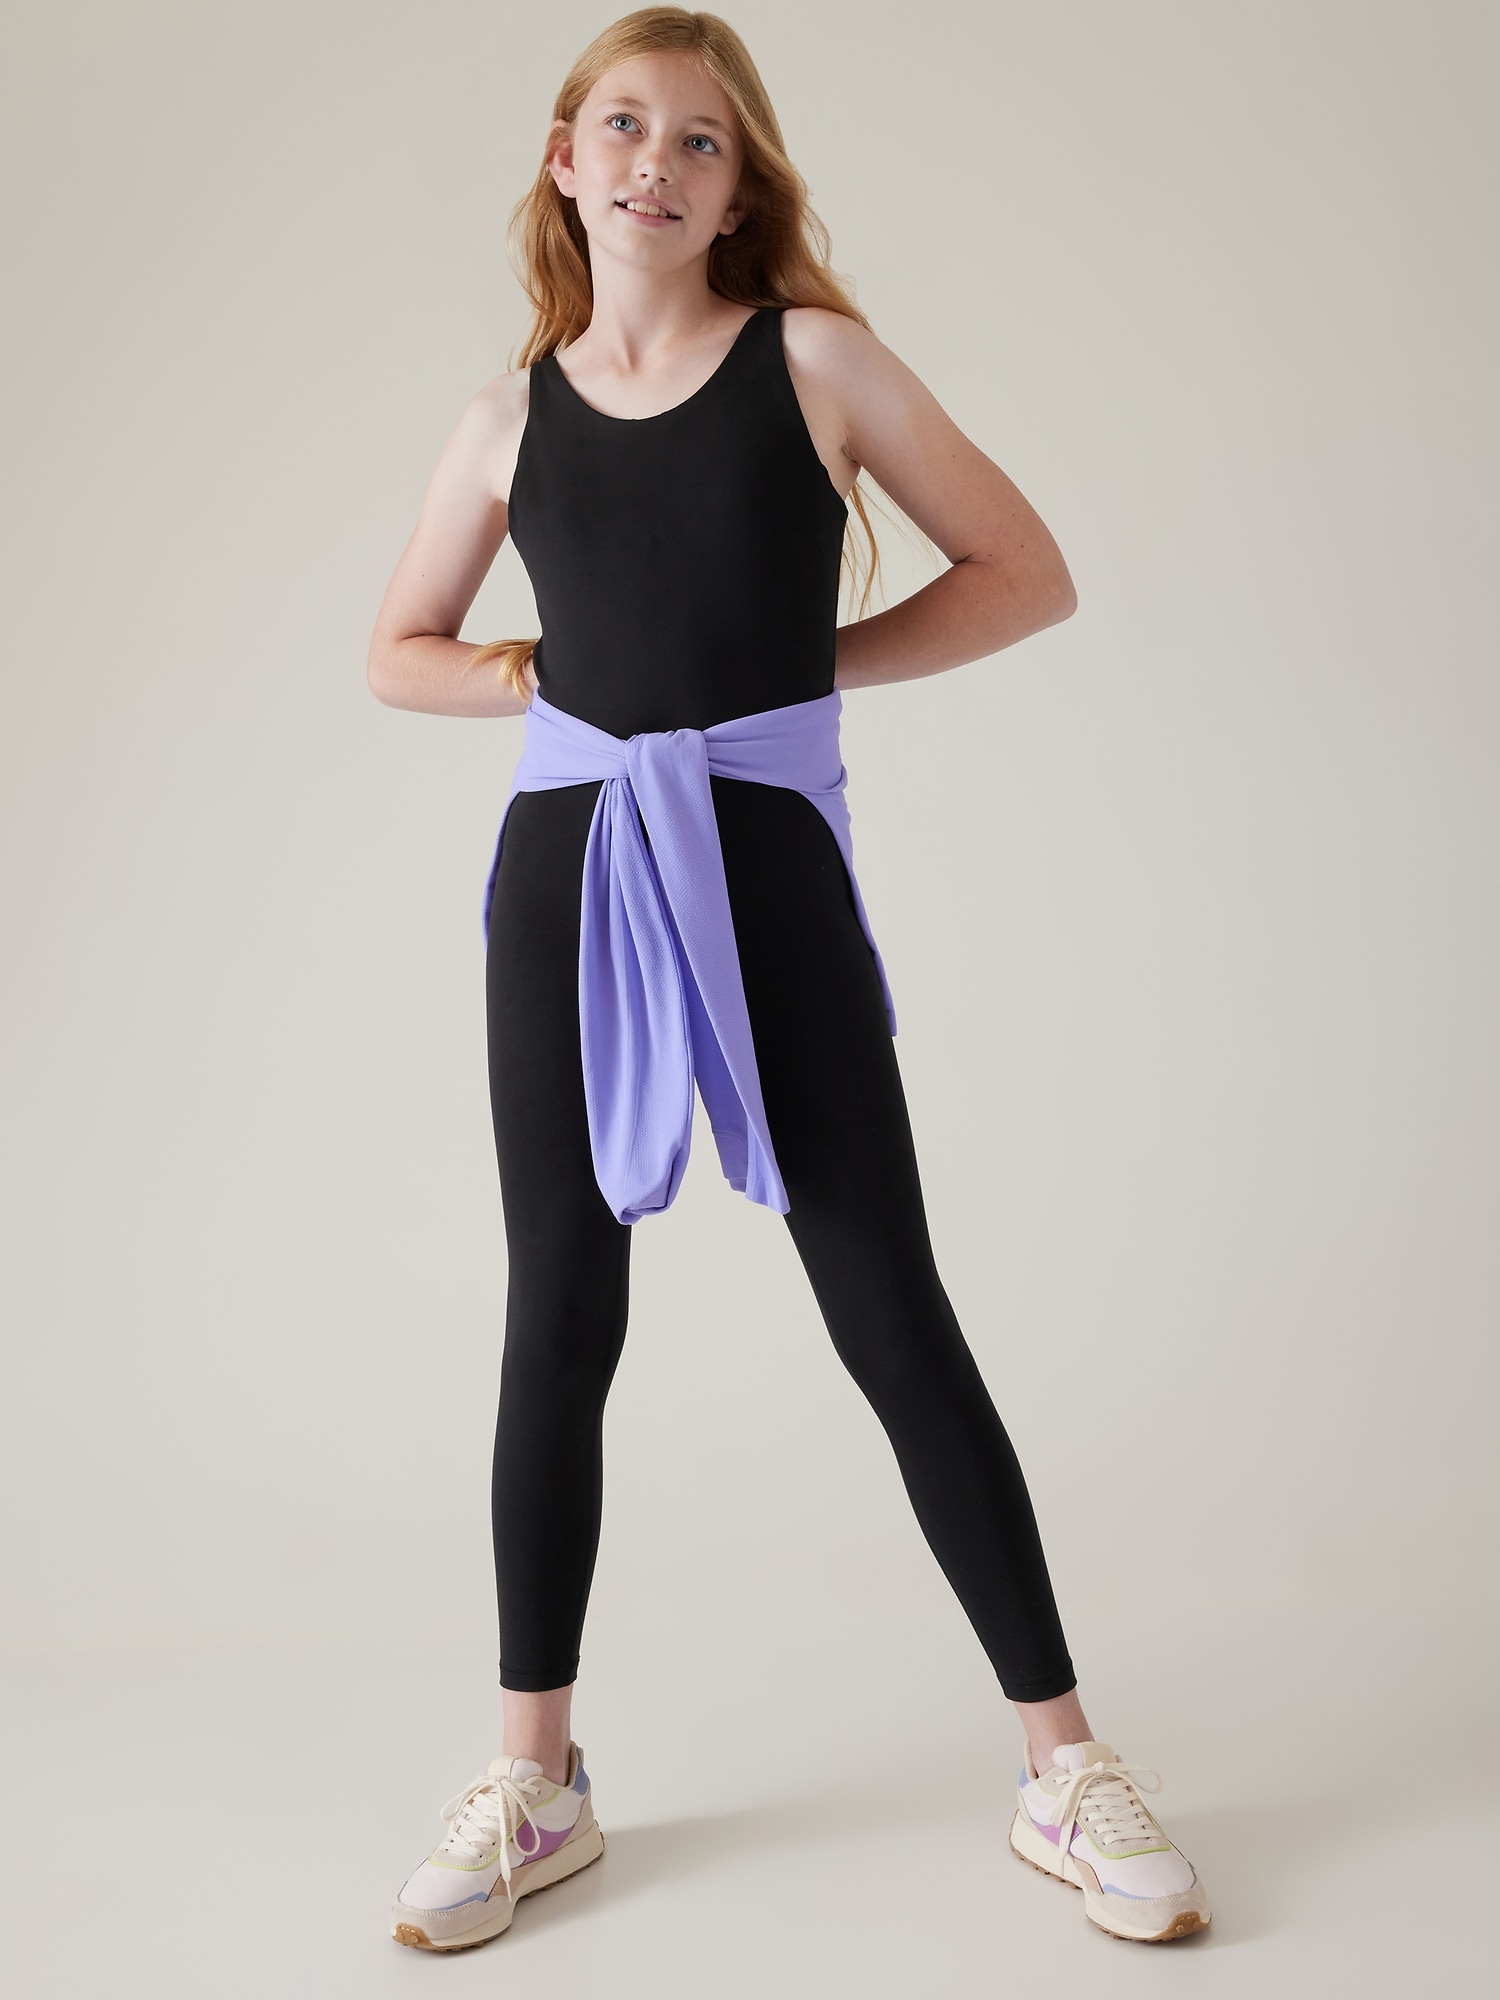 It's Time To Up Your Yoga Gear Game - The Kit Athleta Yoga Gear